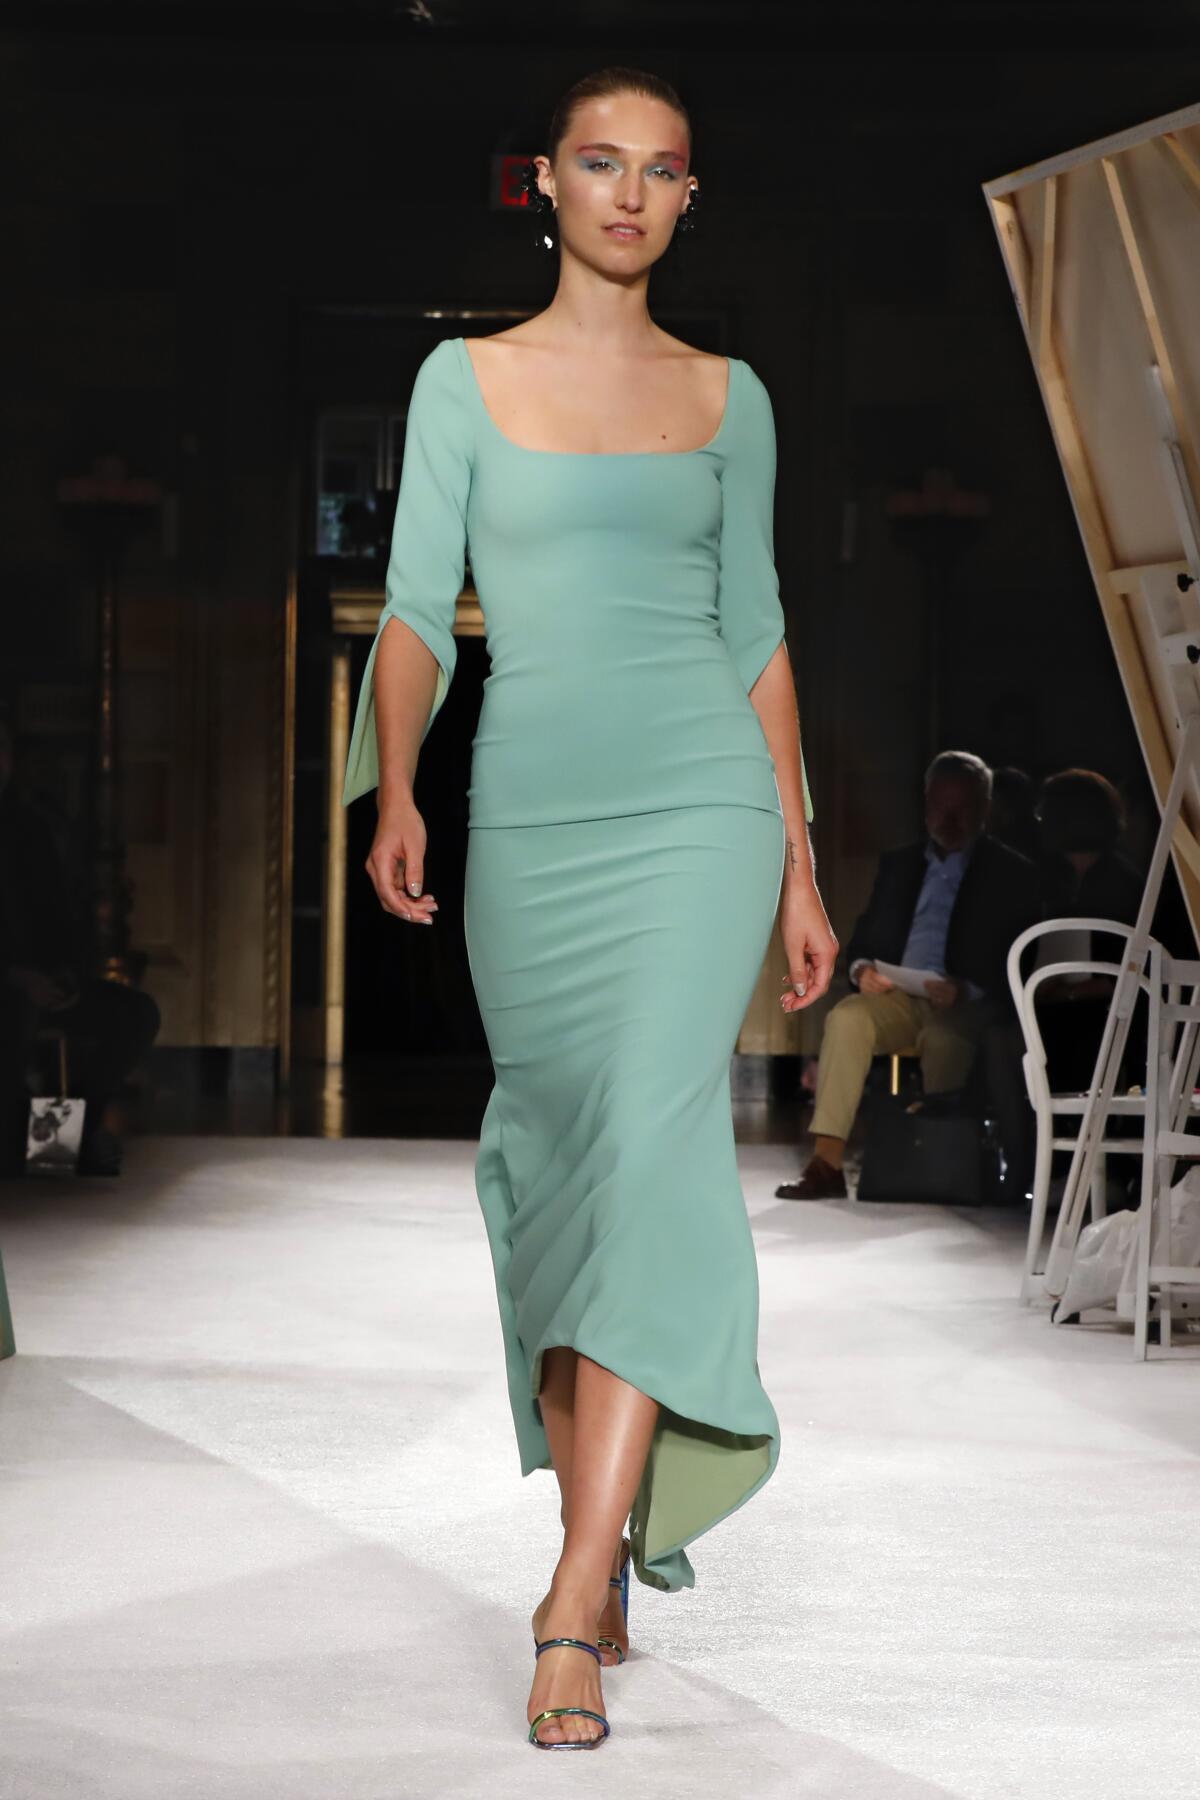 A model wears a sage green dress from Christian Siriano's 2020 runway collection